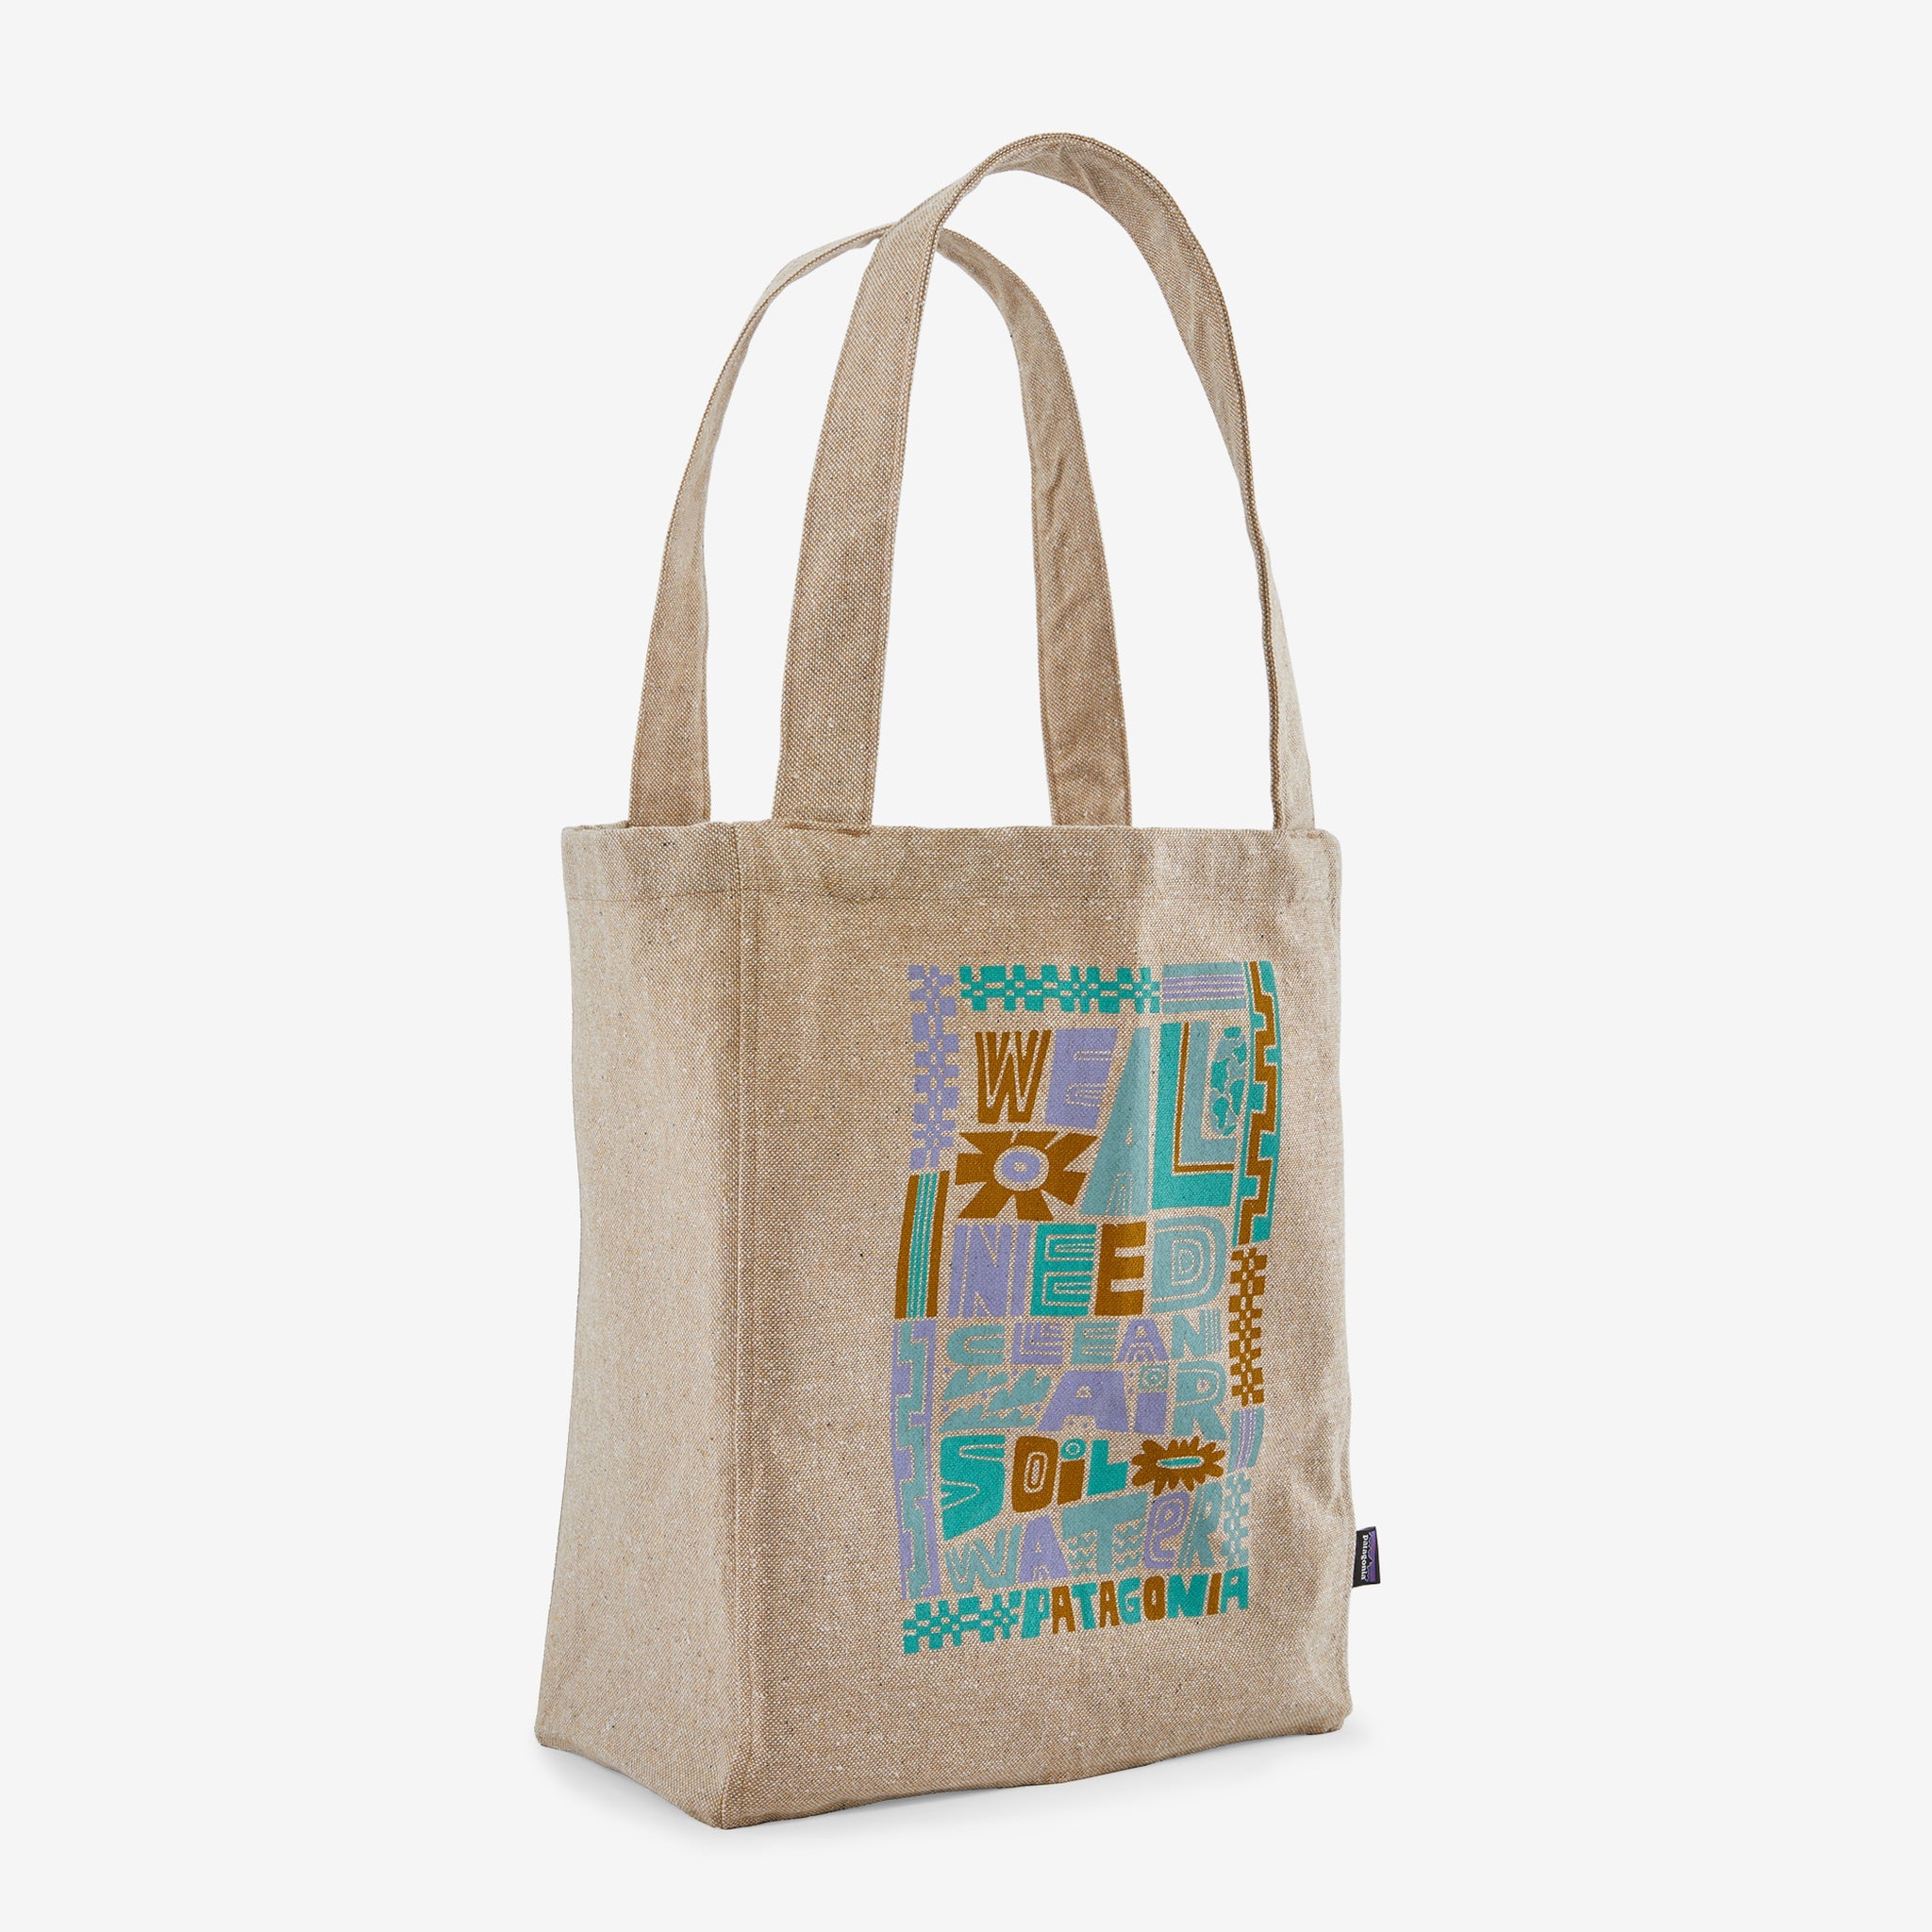 Recycled Market Tote - Patagonia New Zealand